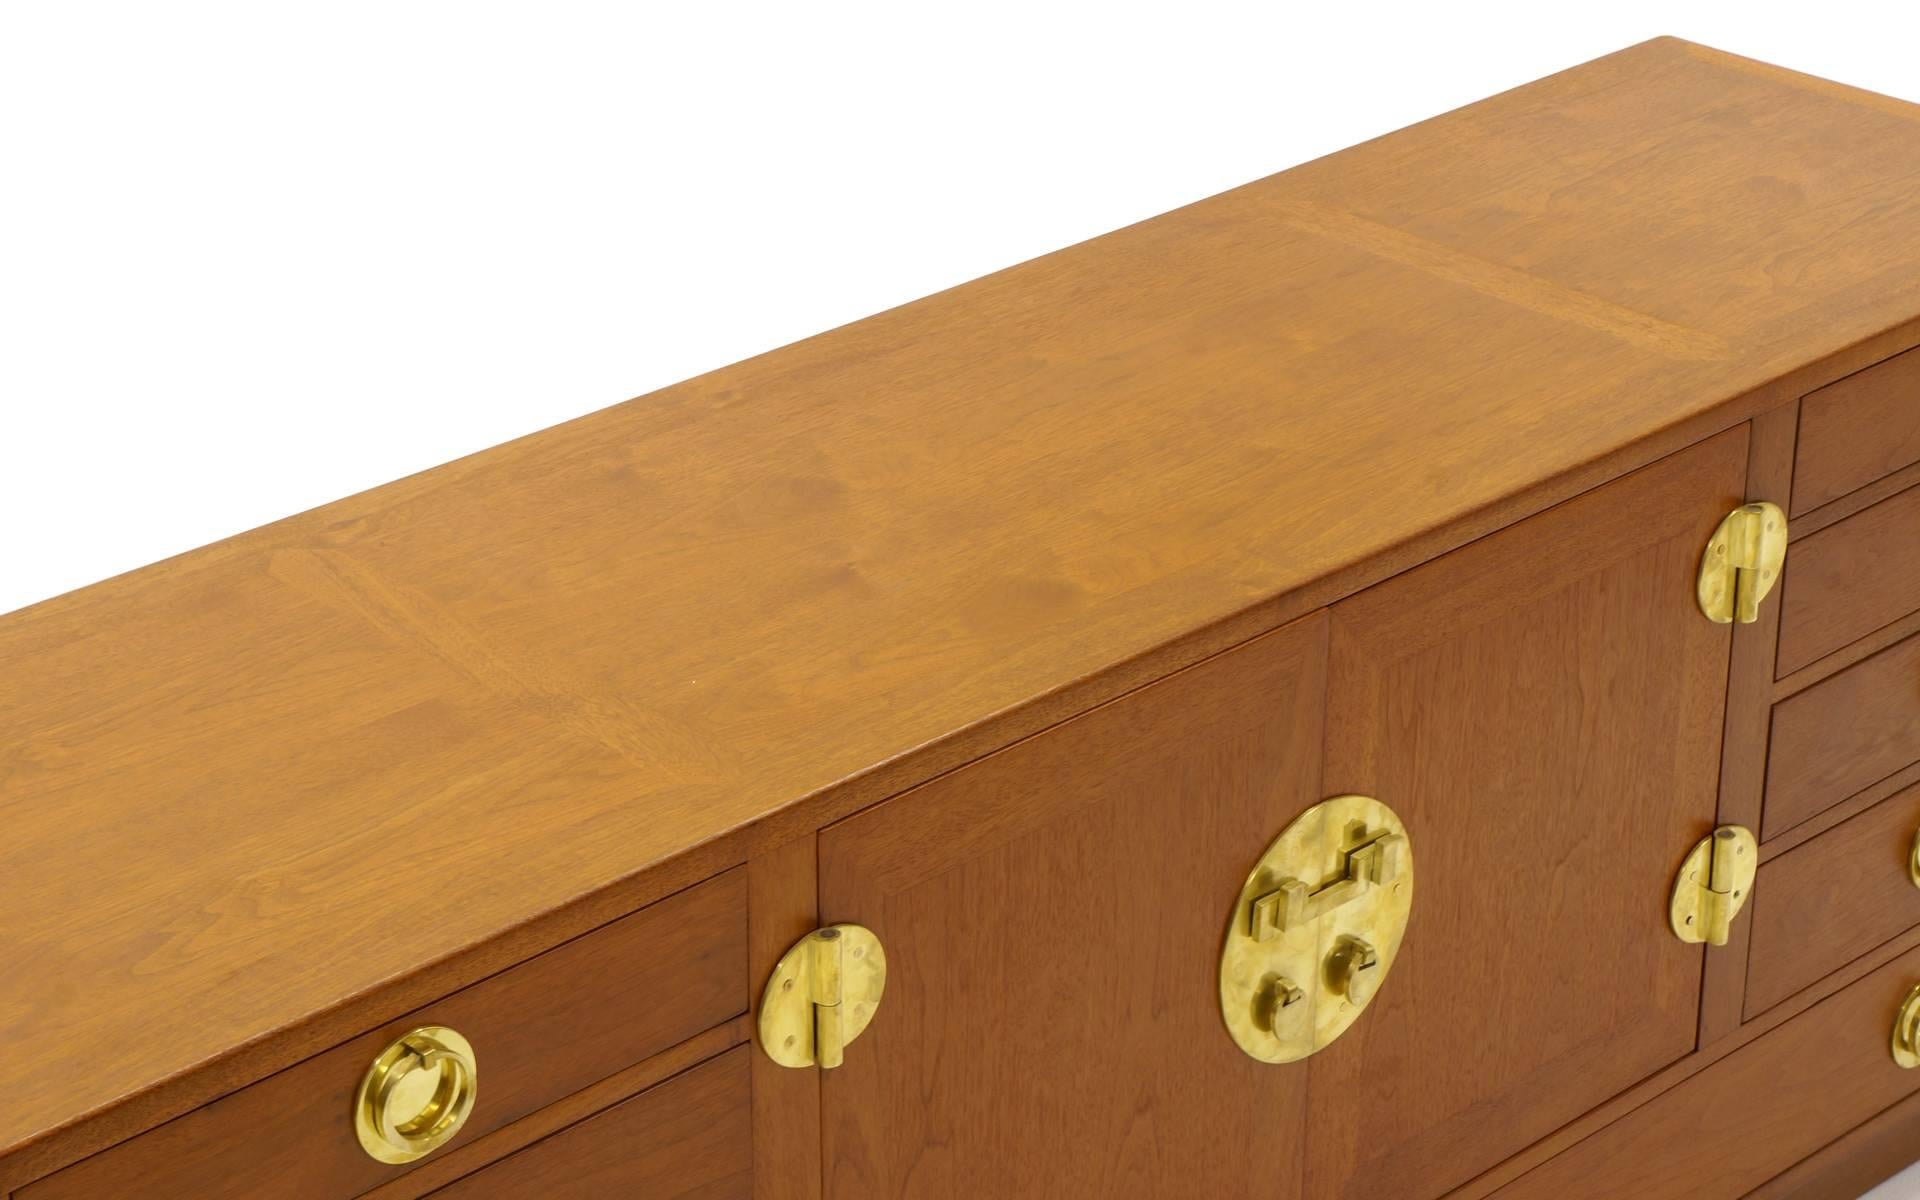 Designed as a dining room buffet / sideboard, this Edward Wormley for Dunbar storage cabinet can be used in any part of the house. The things that make it specific to being a dining room buffet / sideboard are the pull out serving tray and the wide